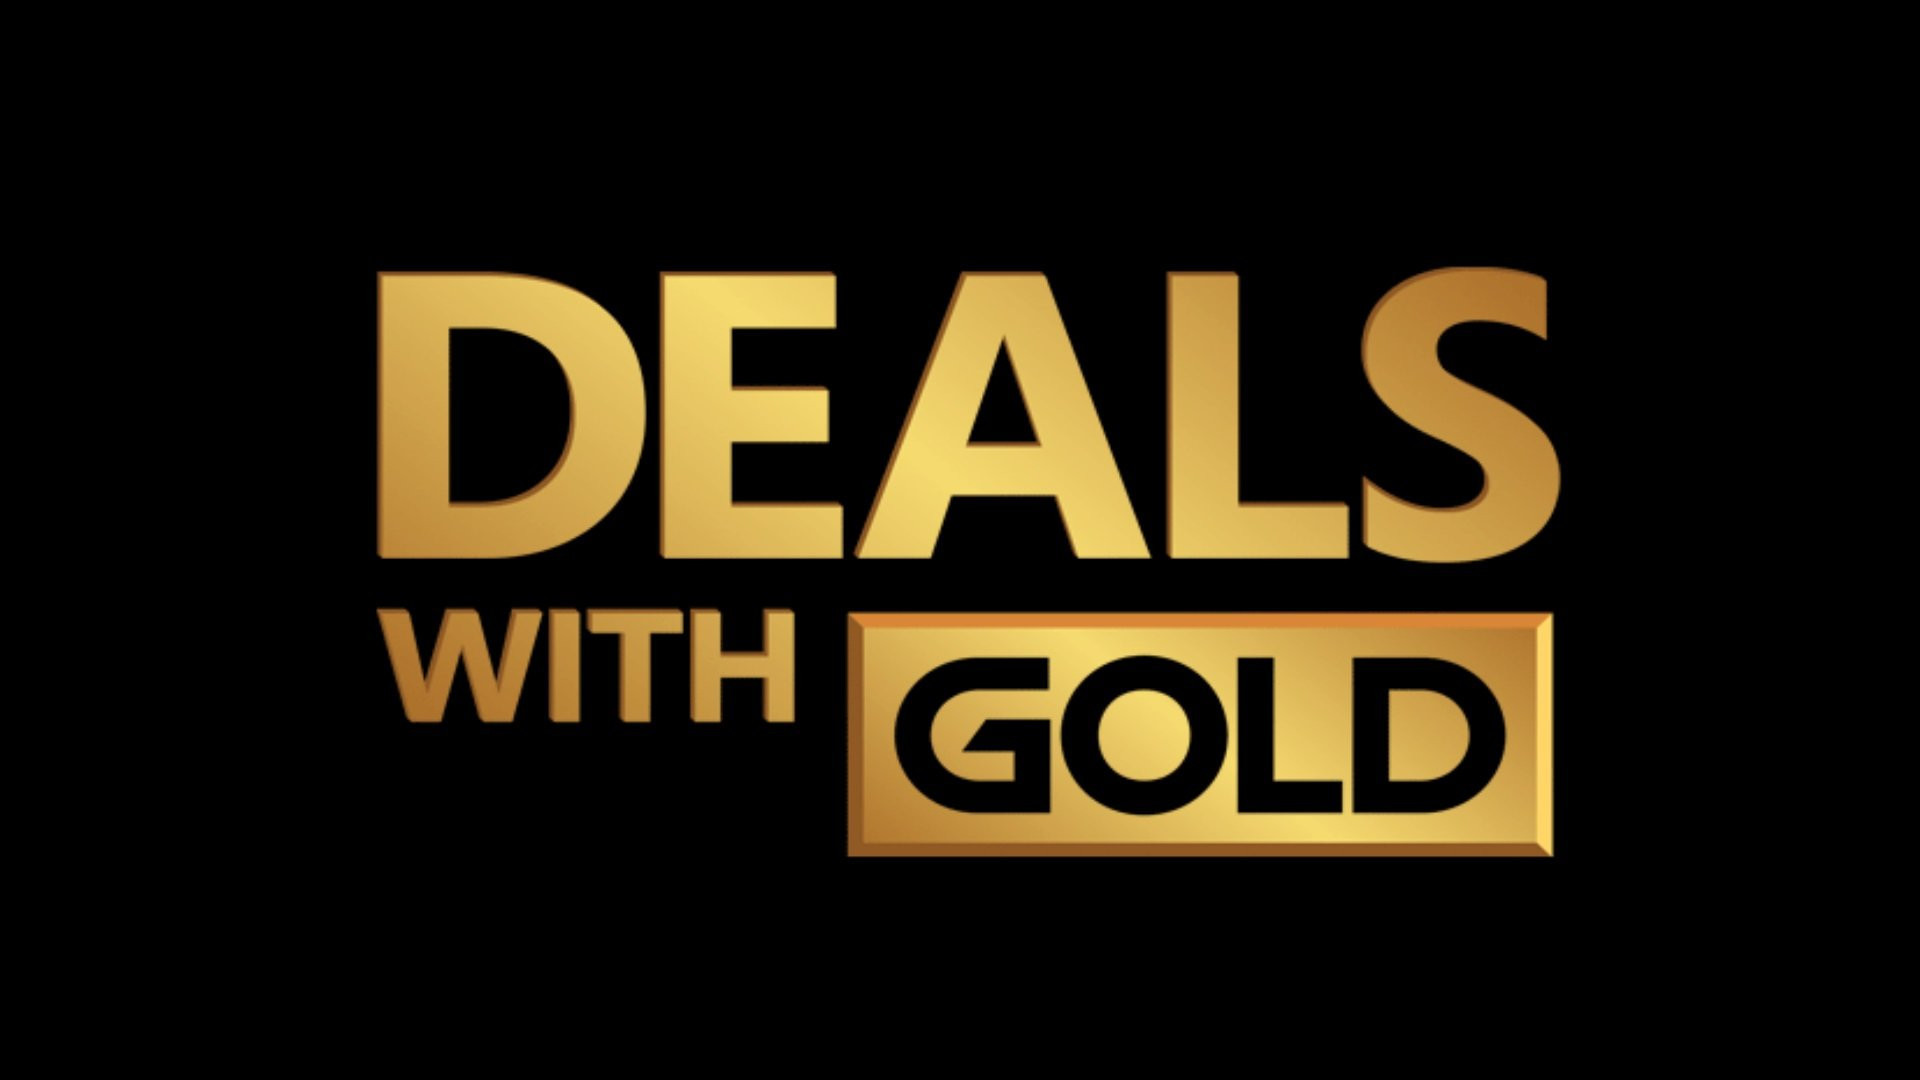 Deals with Gold semaine 39